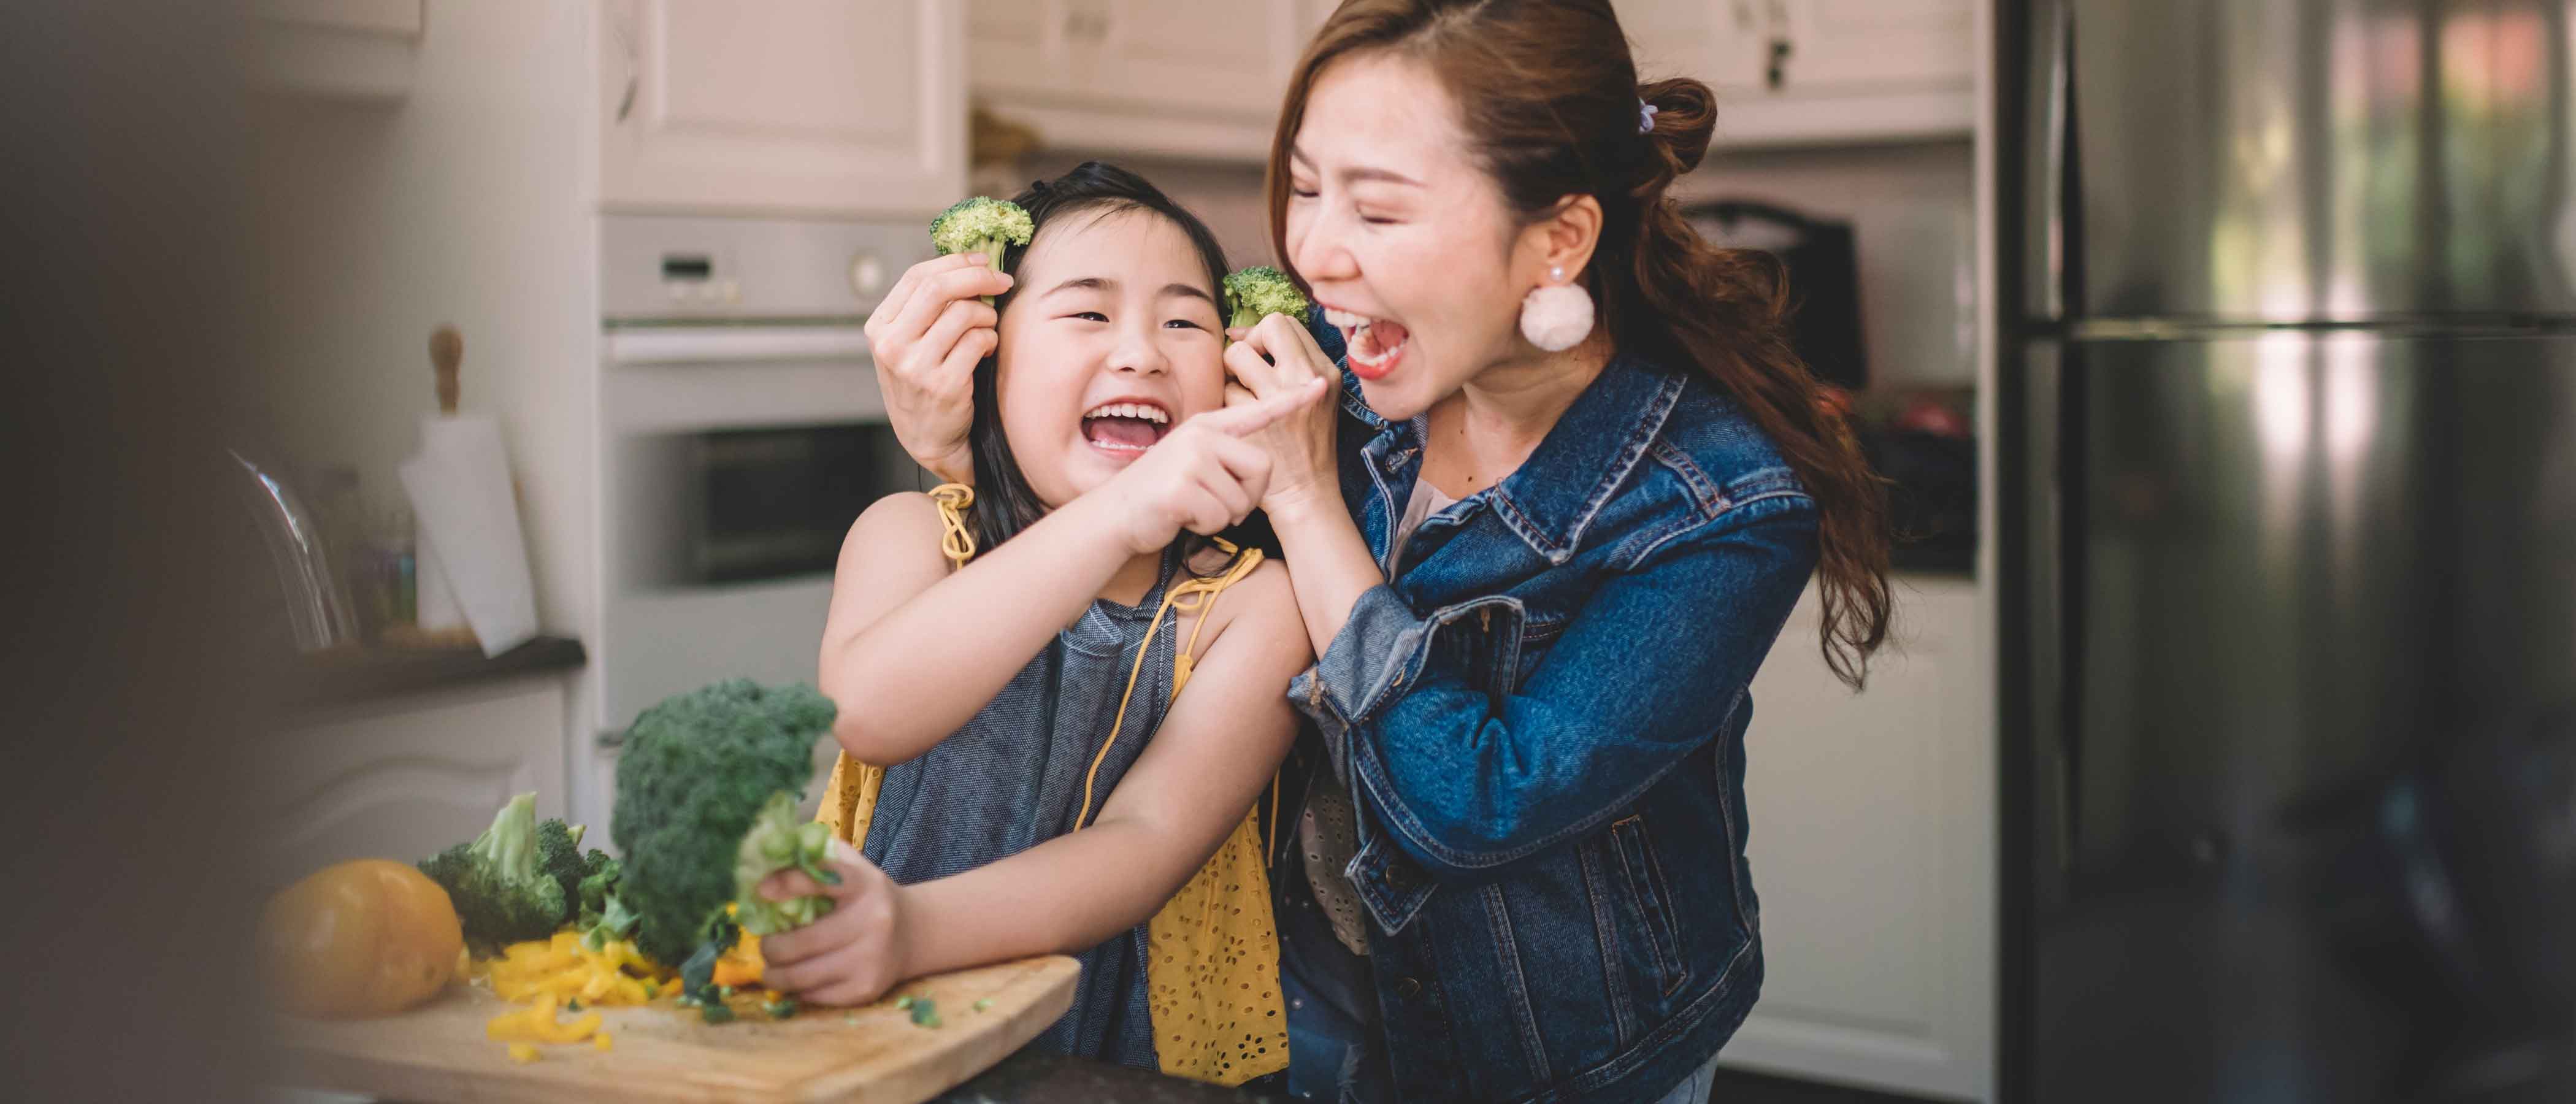 Mother and daughter in kitchen having fun while preparing food